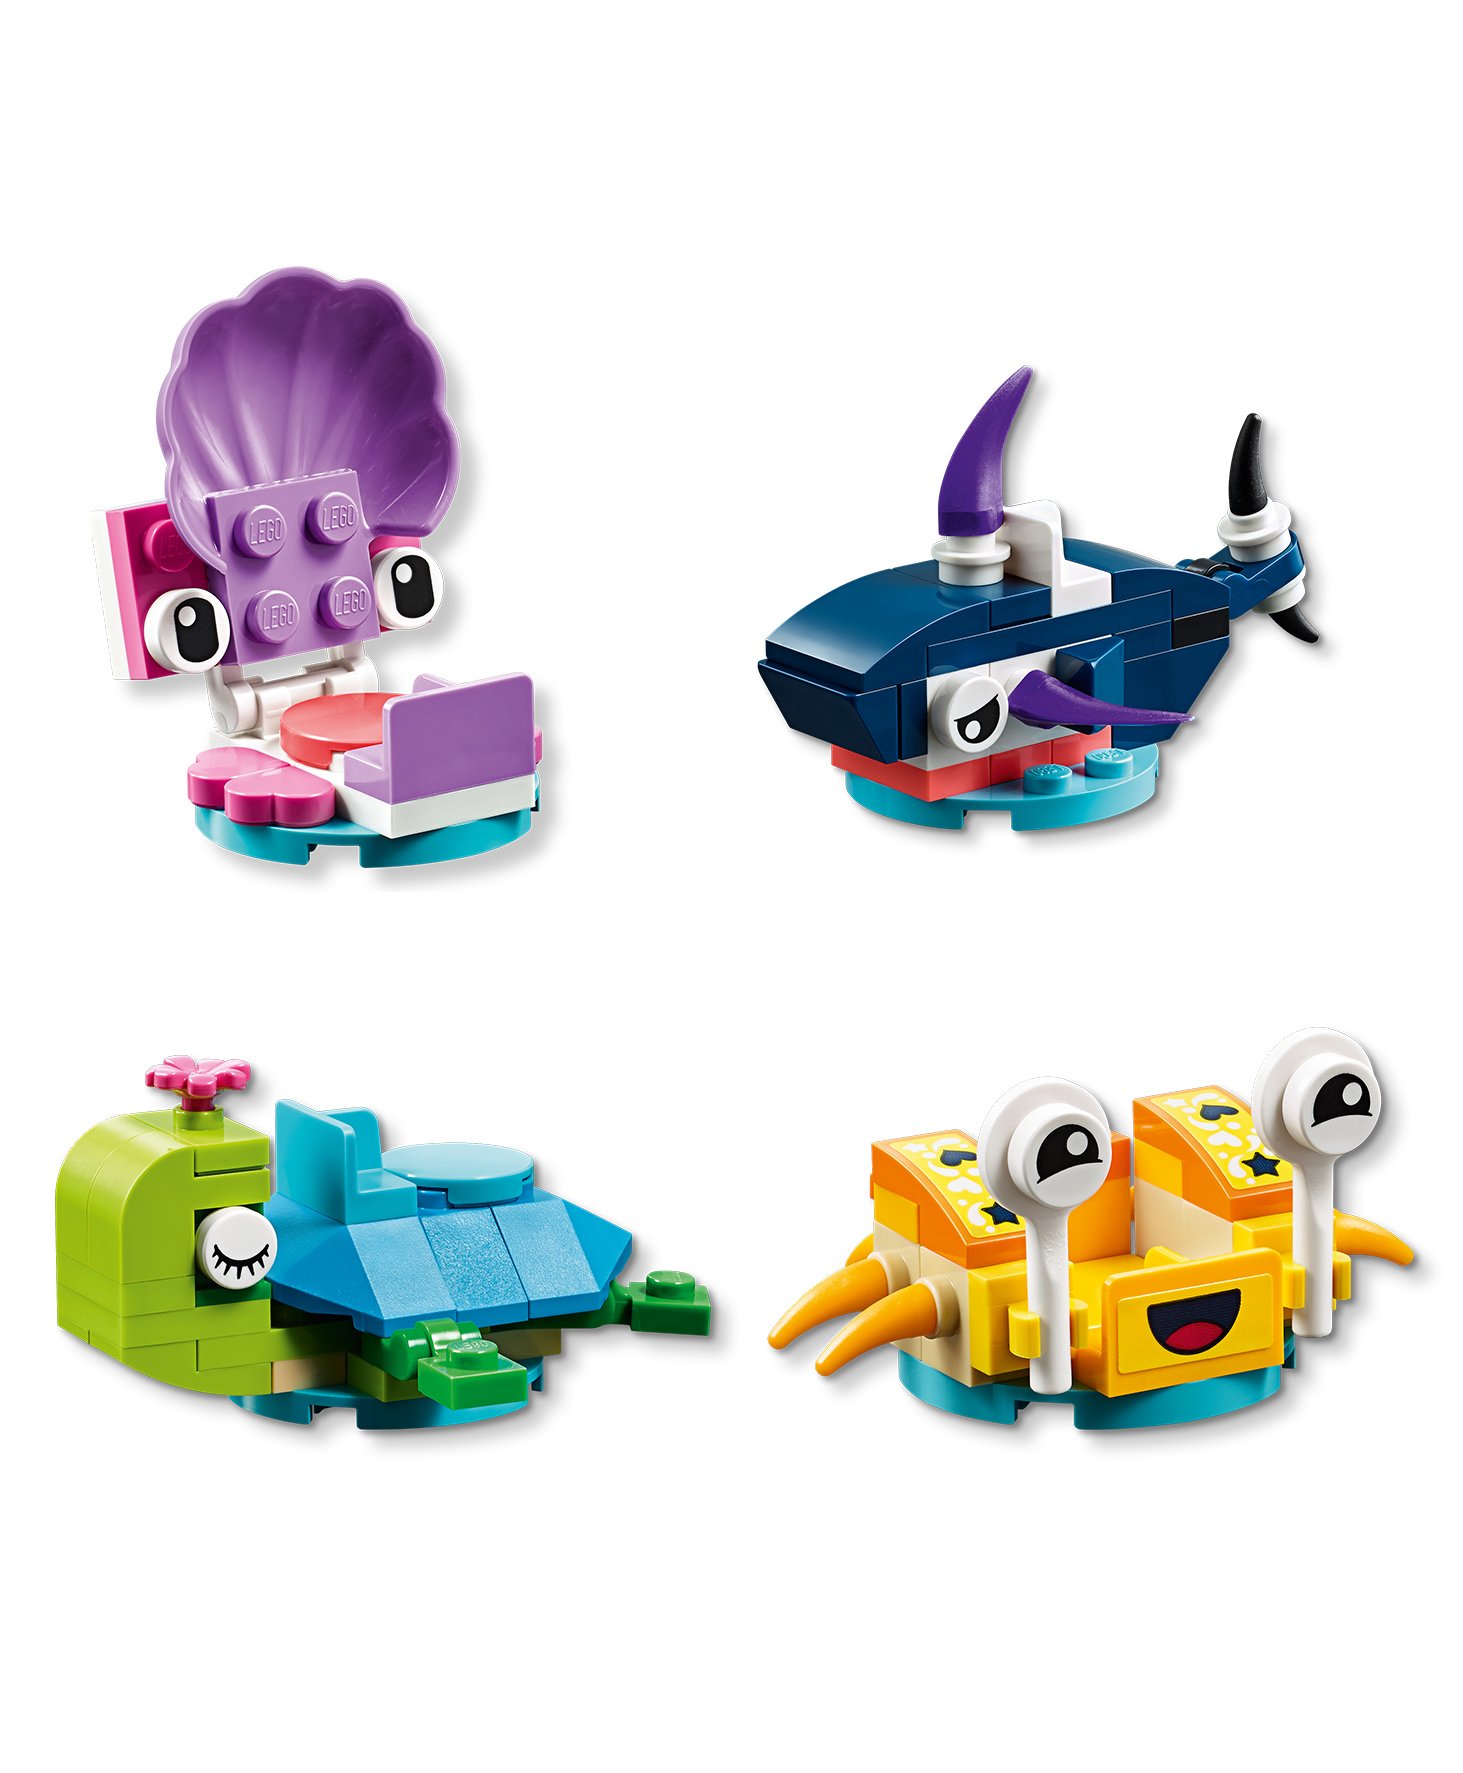 LEGO Friends Funny Octopus Ride Playset 41373 - 324 Pieces ...